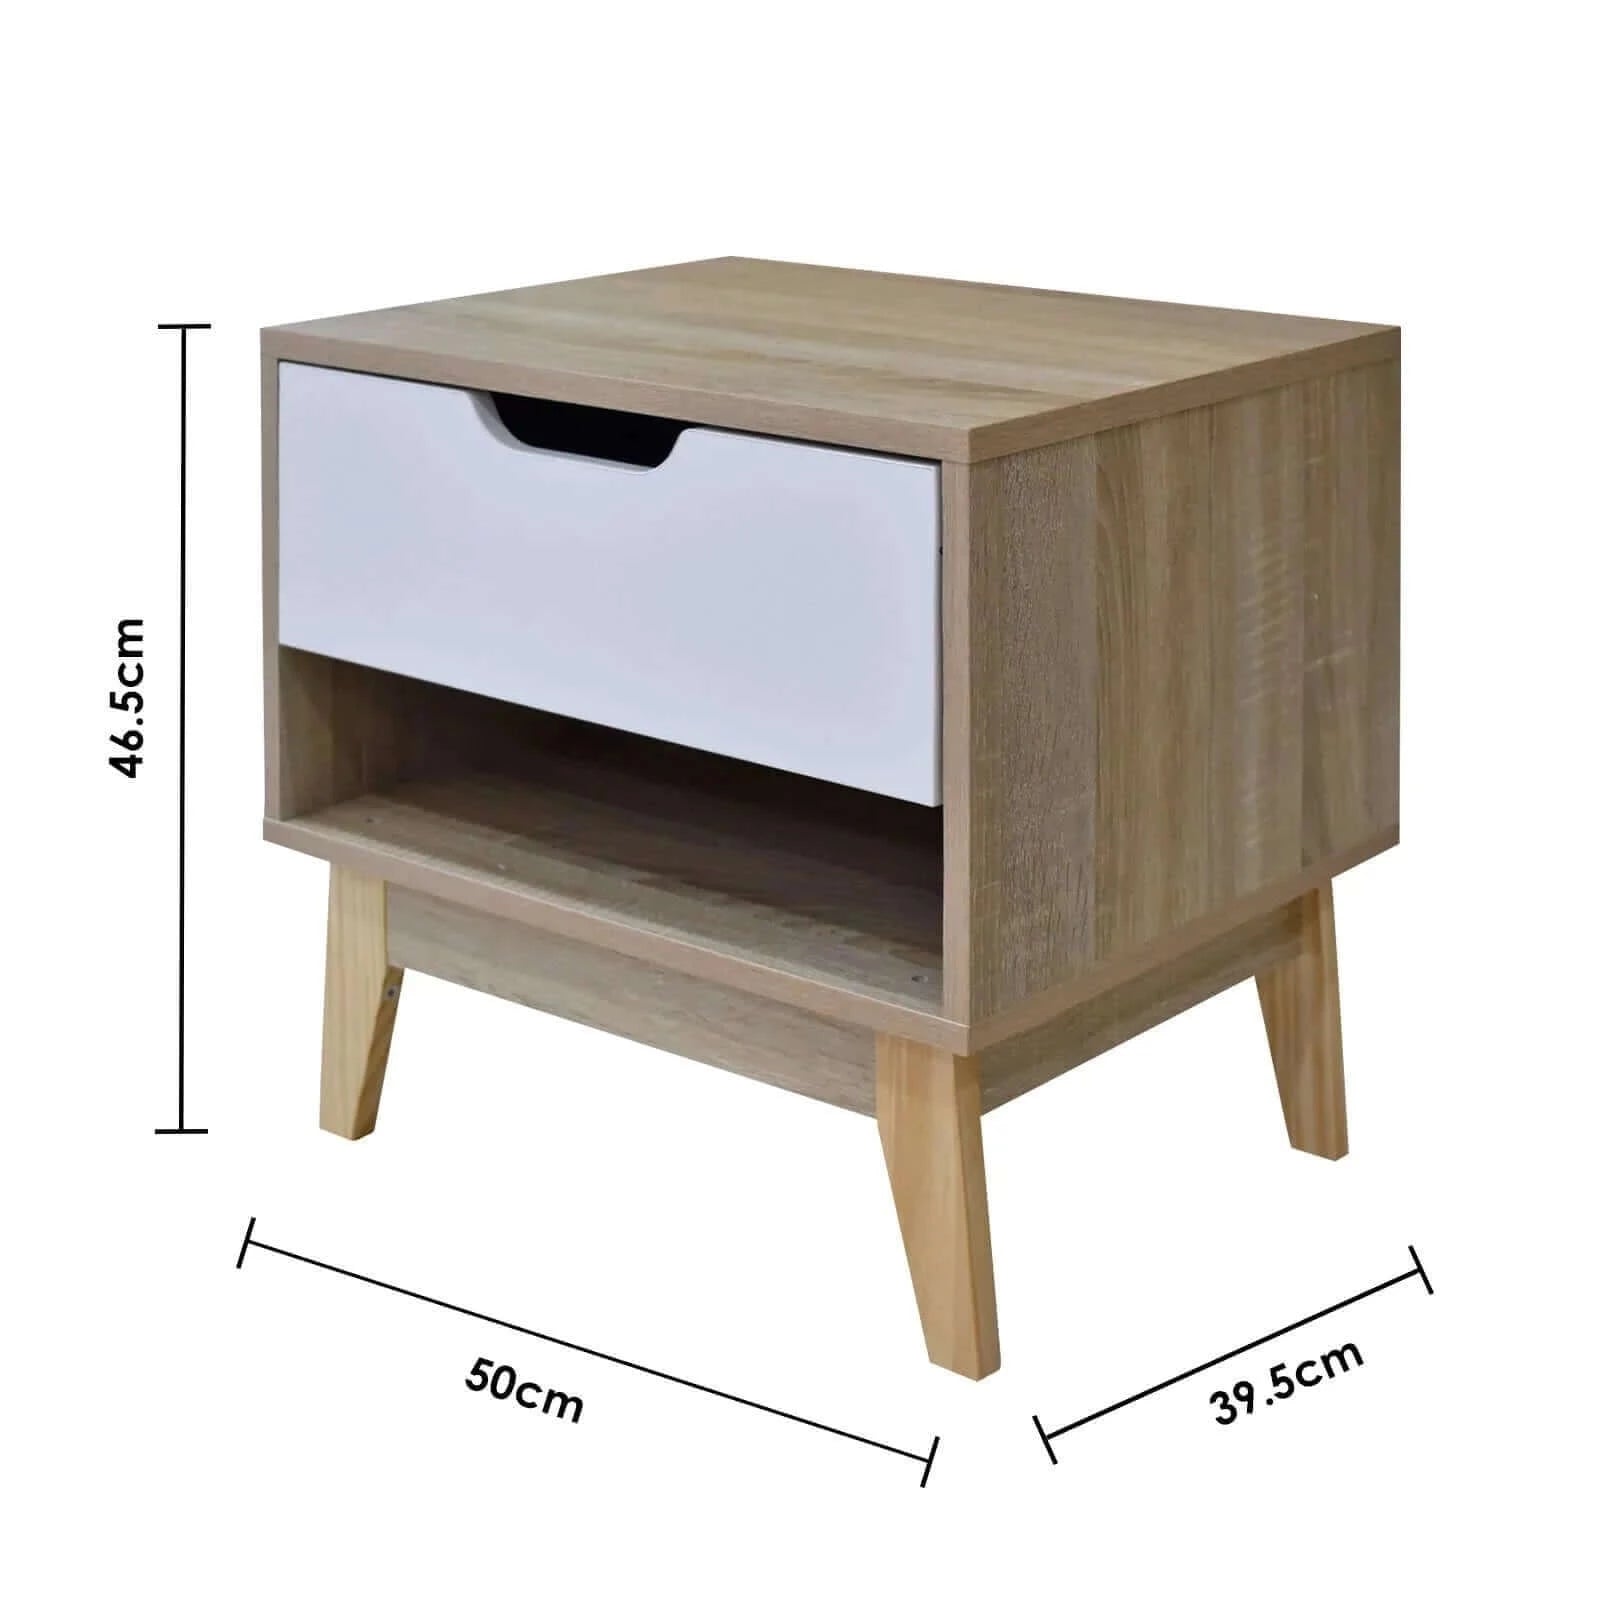 Buy milano decor bedside table manly drawers nightstand unit cabinet storage - upinteriors-Upinteriors